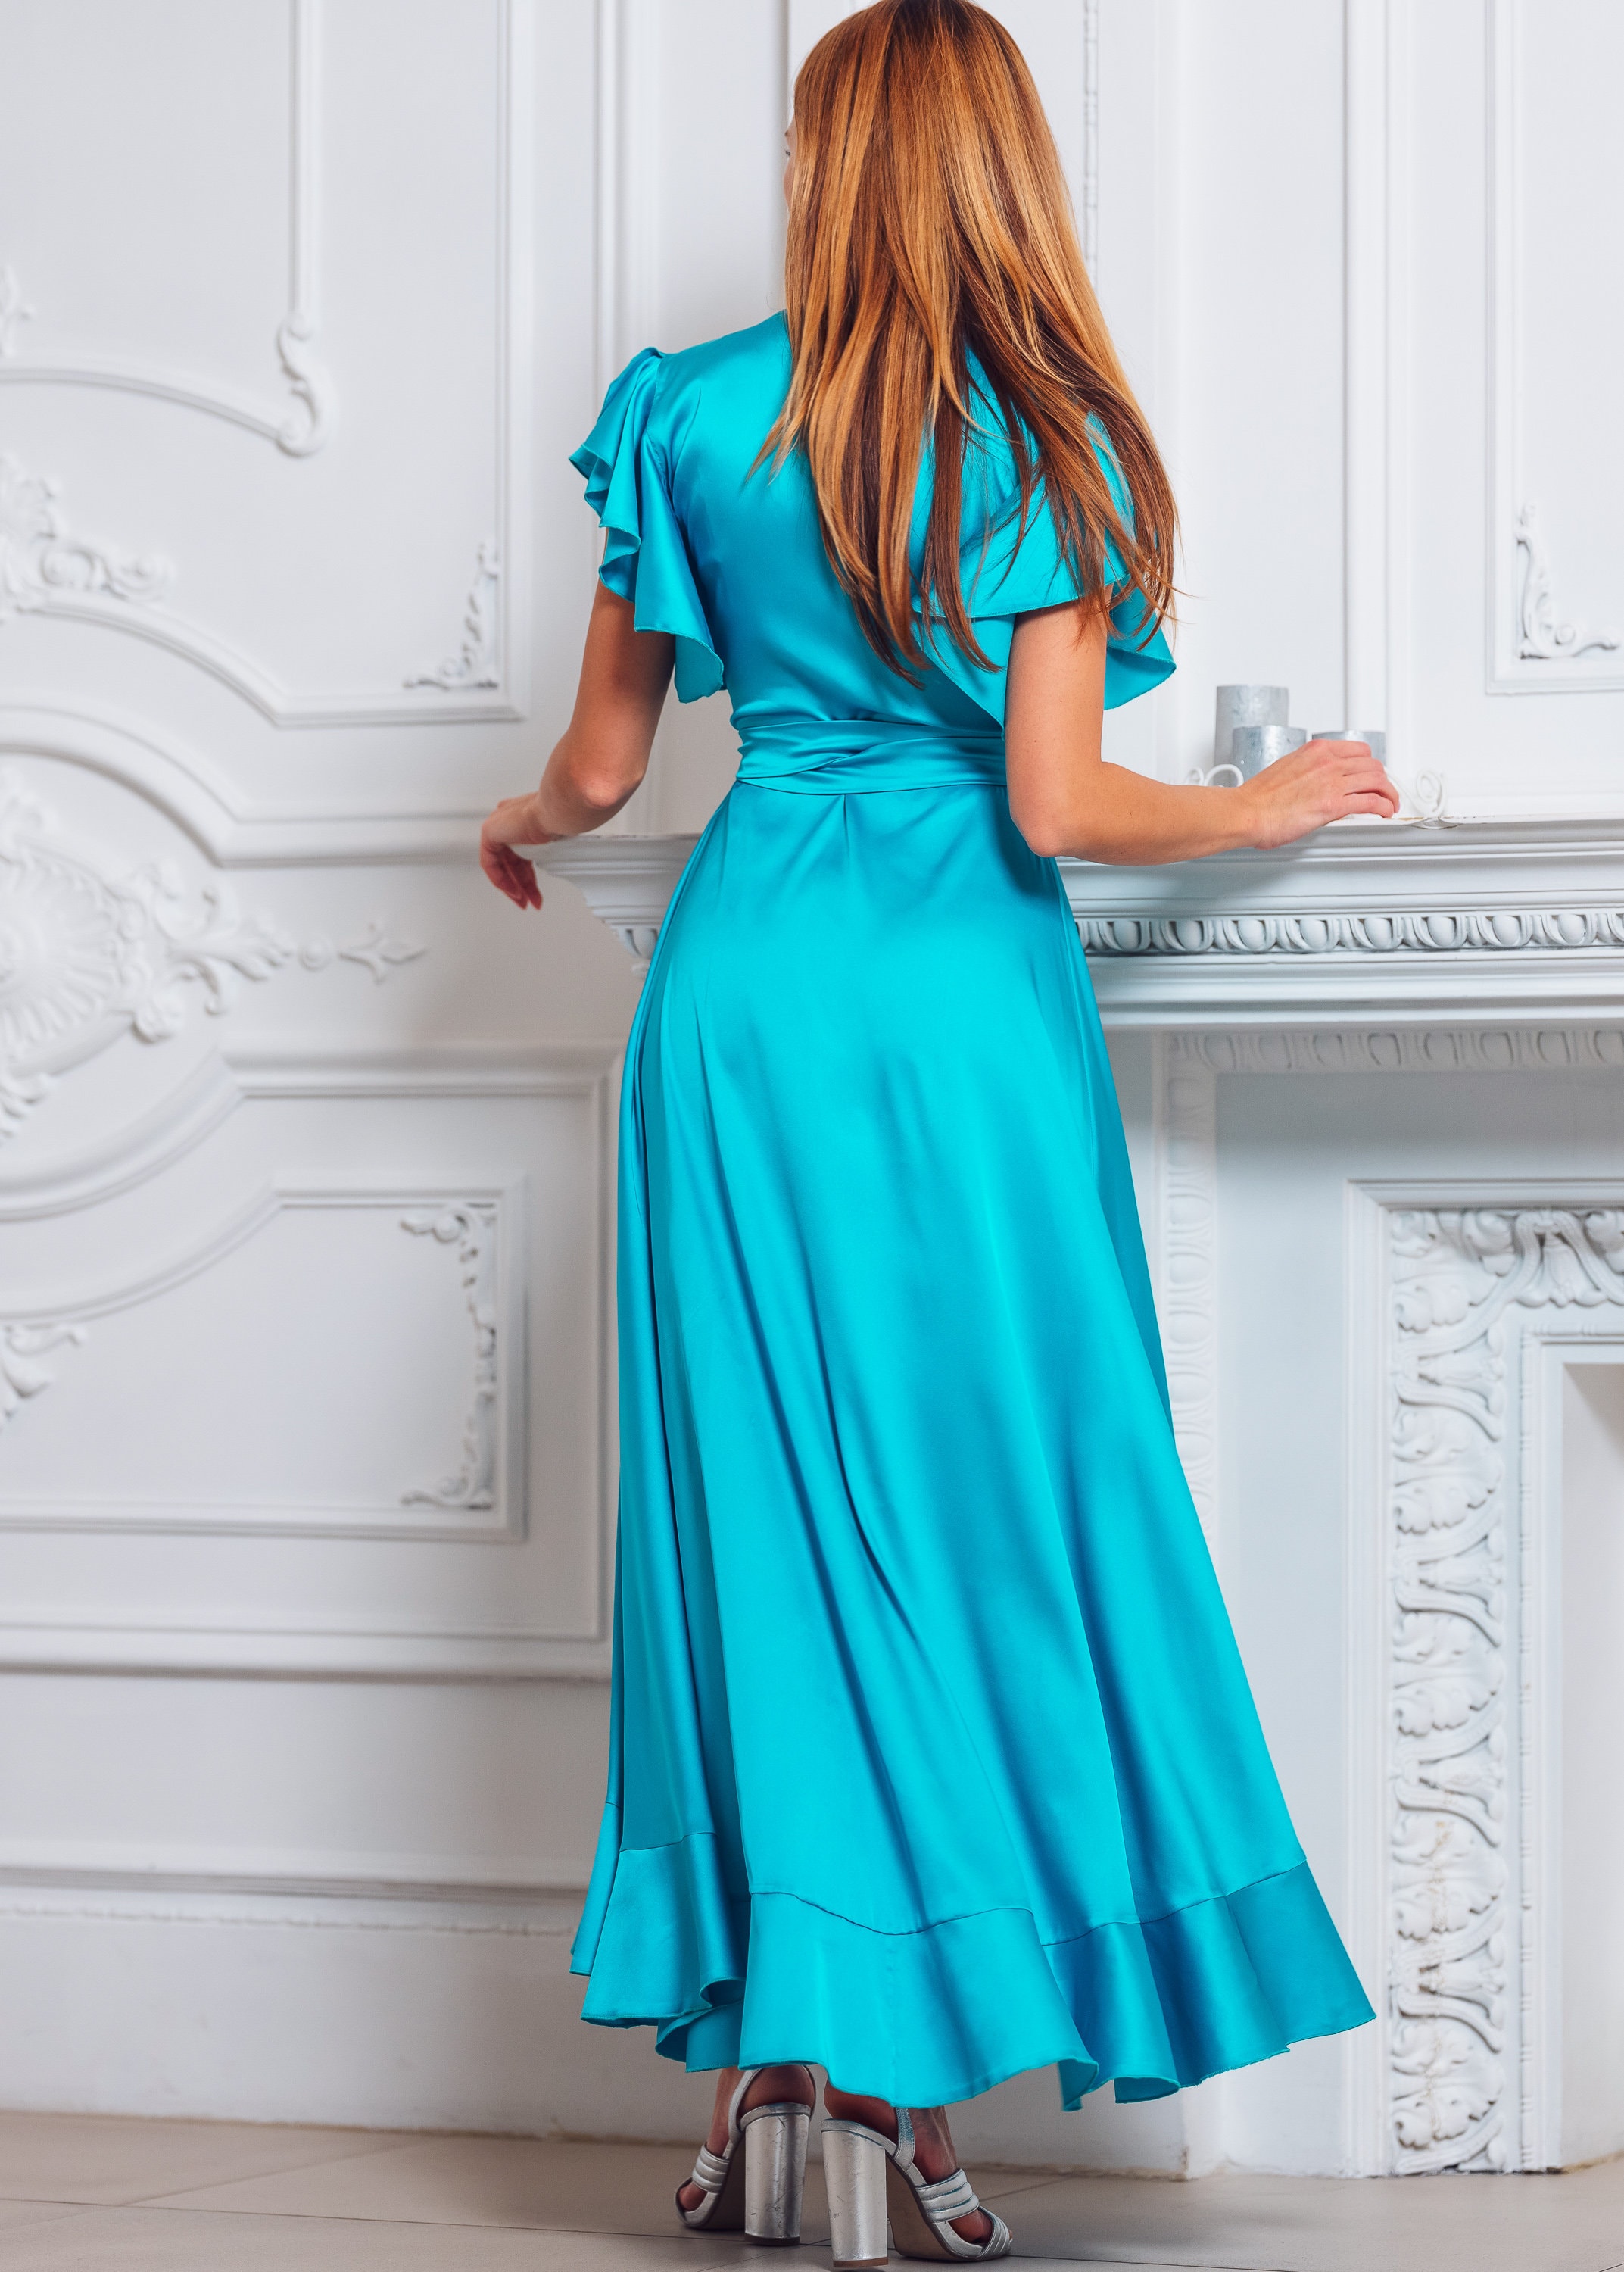 JS COLLECTIONS FAUX WRAP BONDED SATIN NAVY/TURQUOISE GOWN DRESS sz